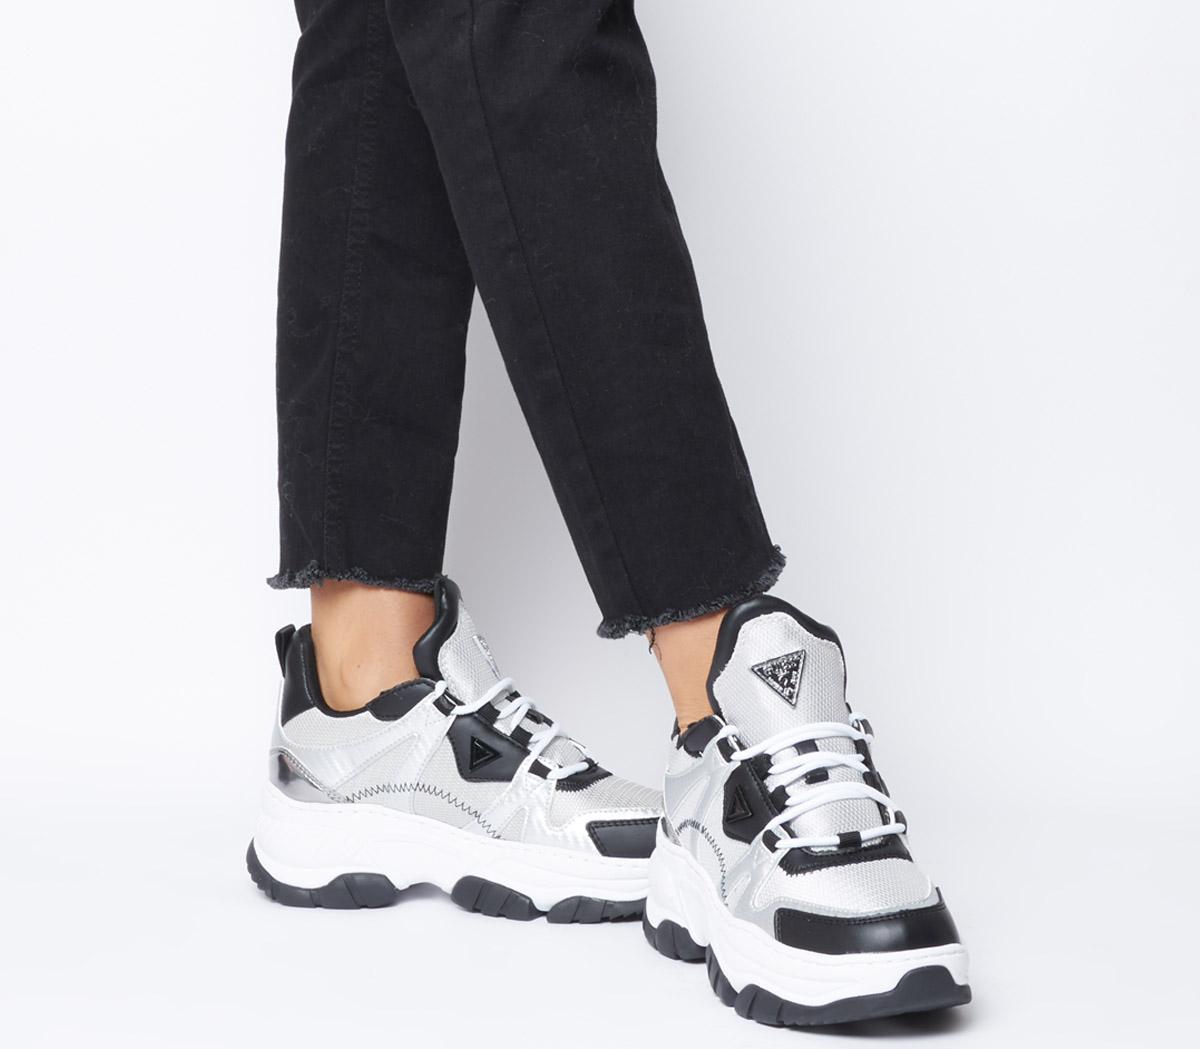 Guess Blushy Silver Black - Hers trainers